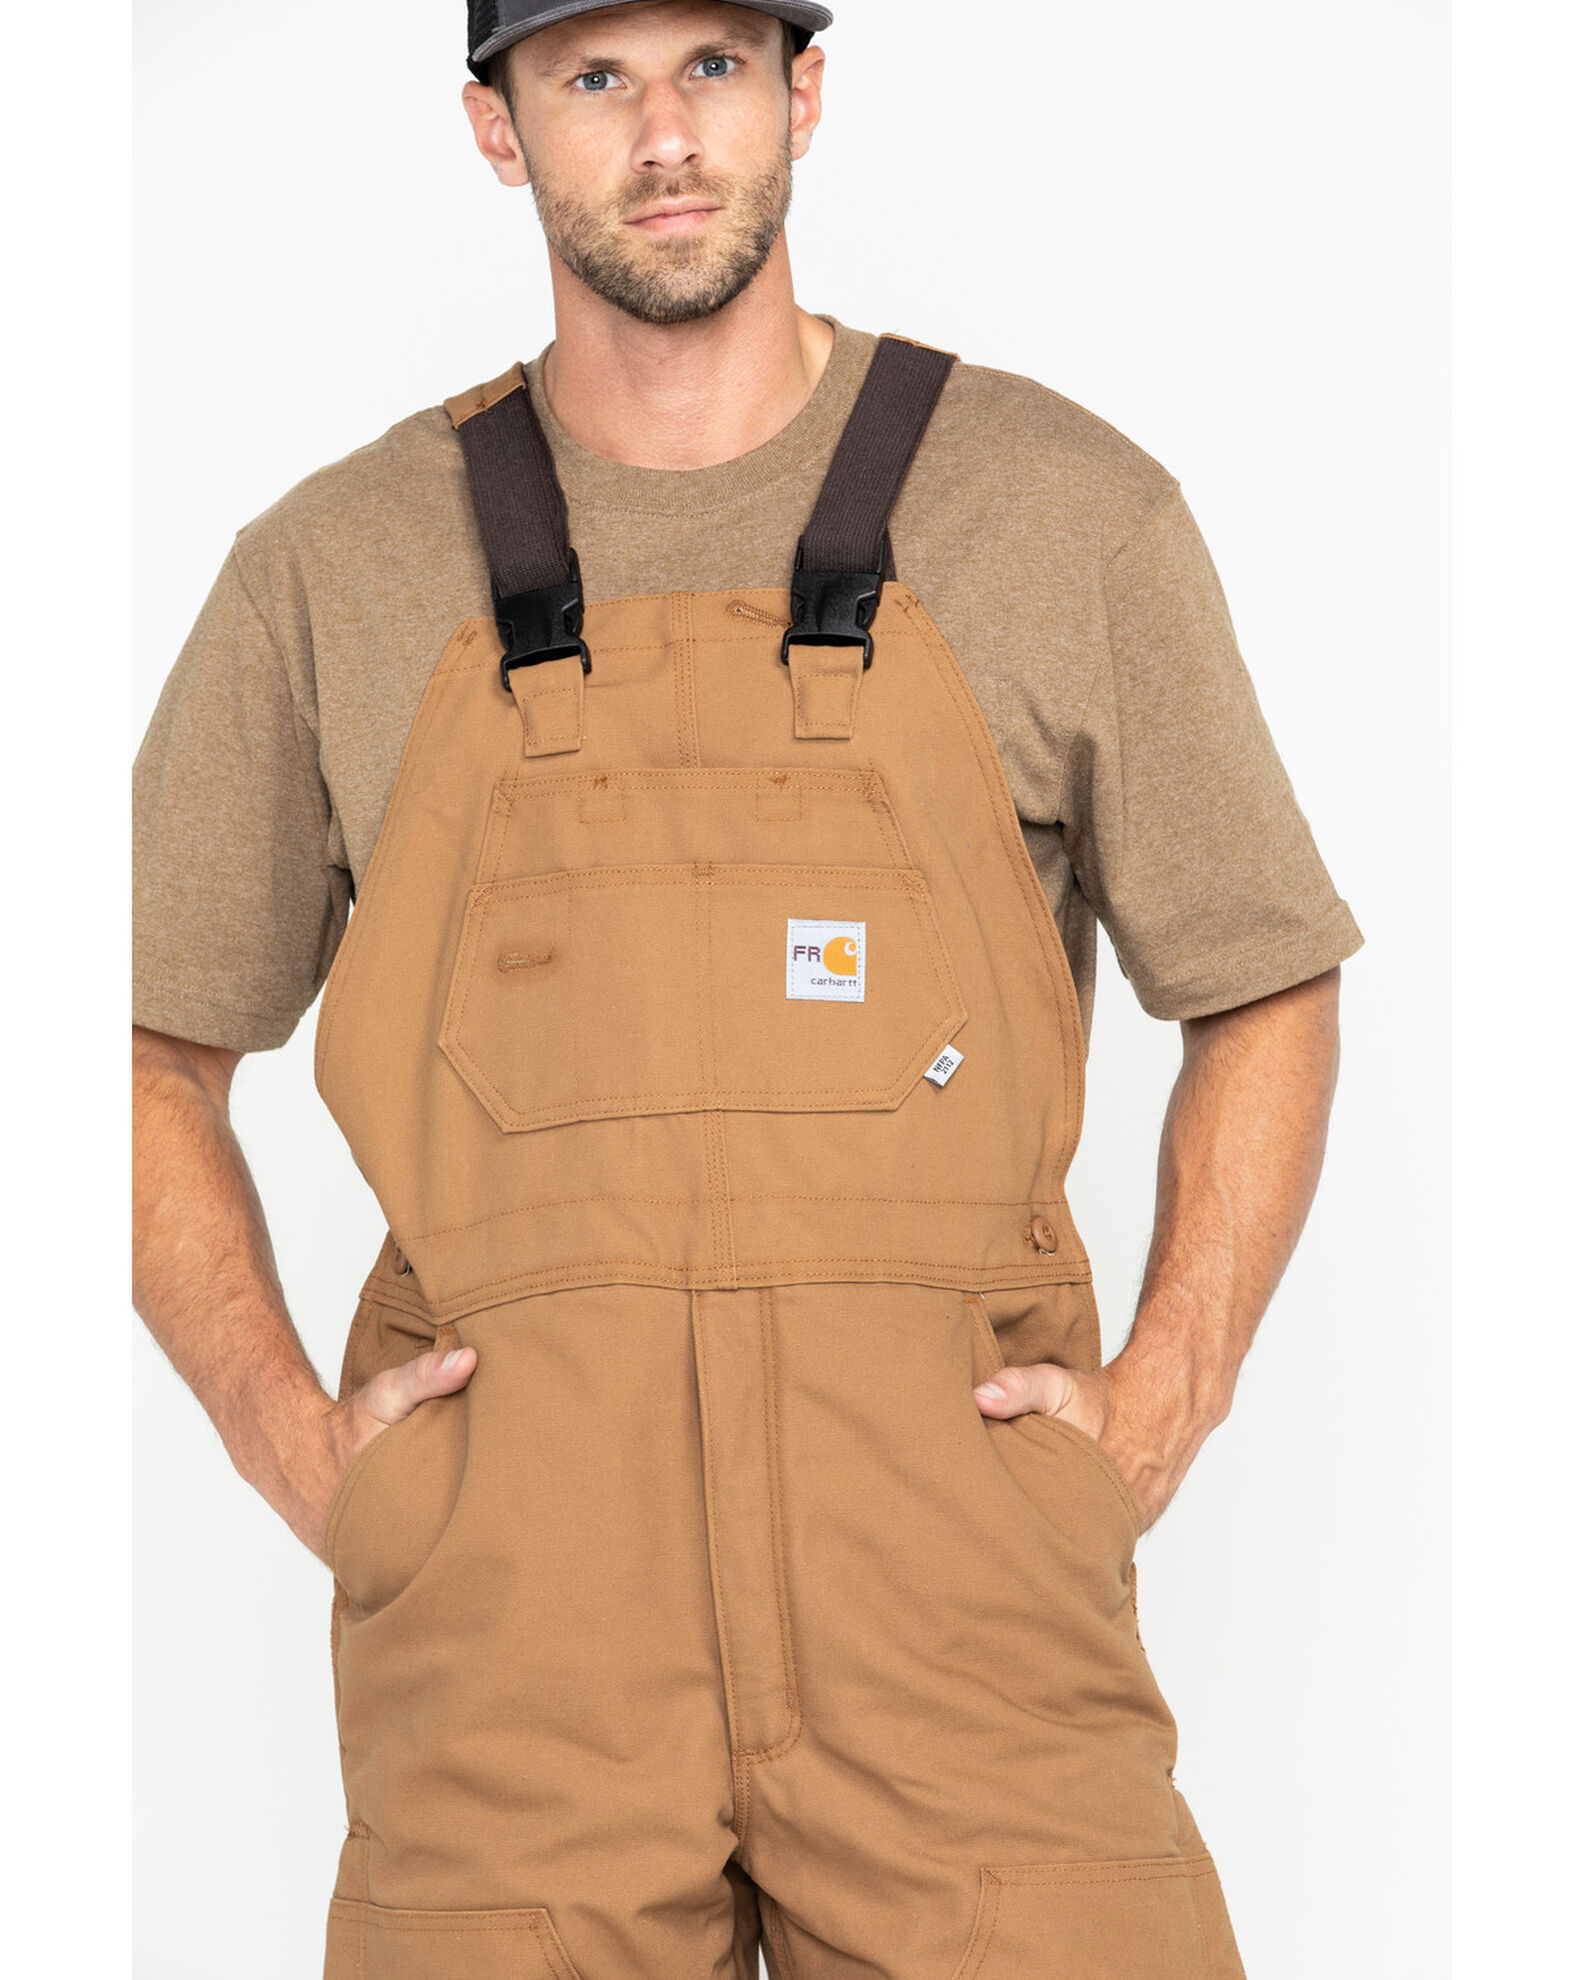 Carhartt Men's Flame Resistant Duck Bib Overall/Quilt Lined FRR44DNY-36X34  from Carhartt - Acme Tools